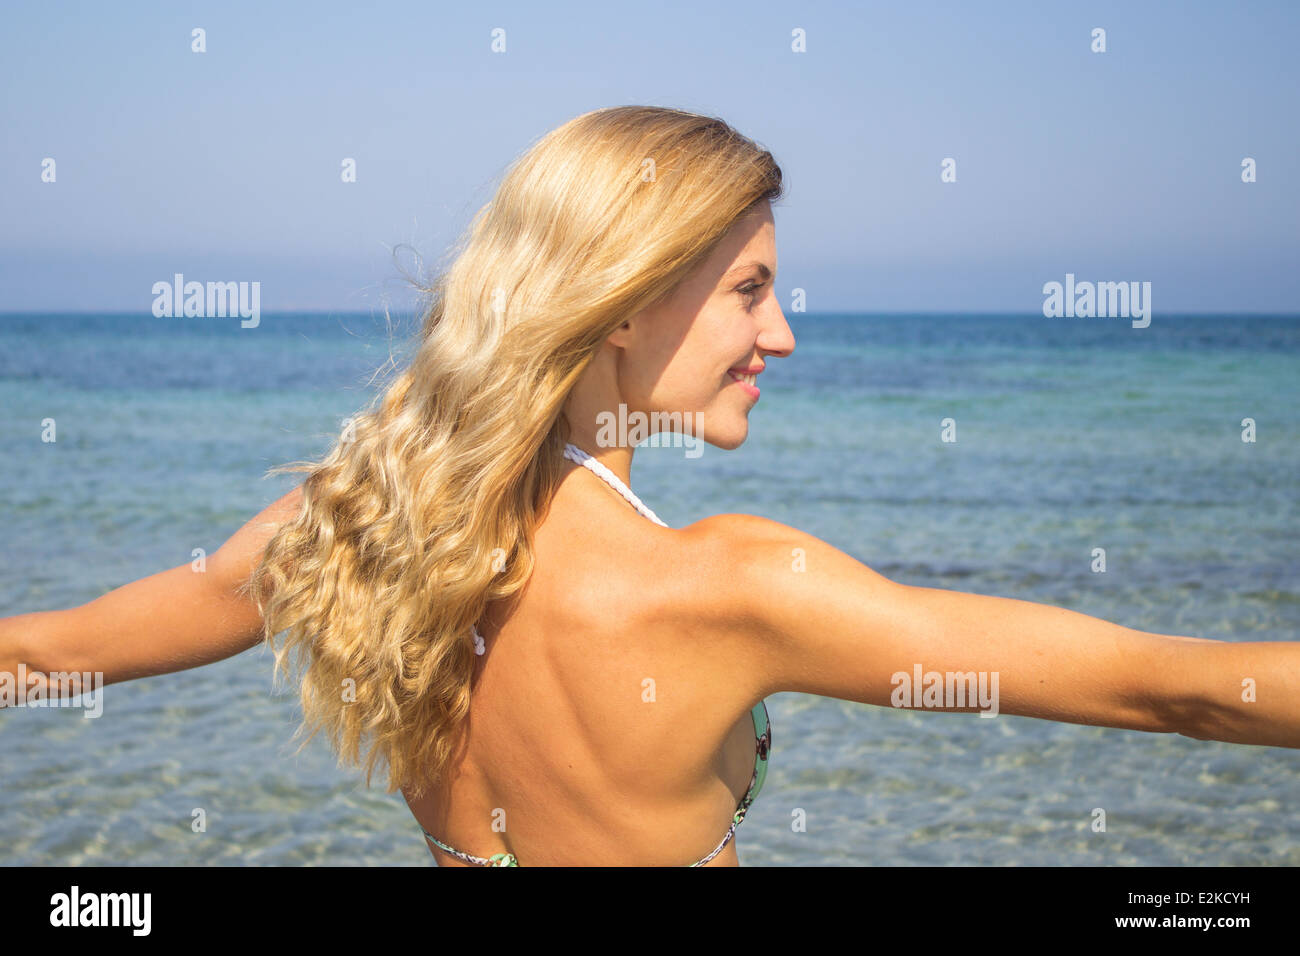 woman bikini portrait sea ocean beach summer vacation holidays free freedom happy smiling smile positive 'hands in air' side Stock Photo